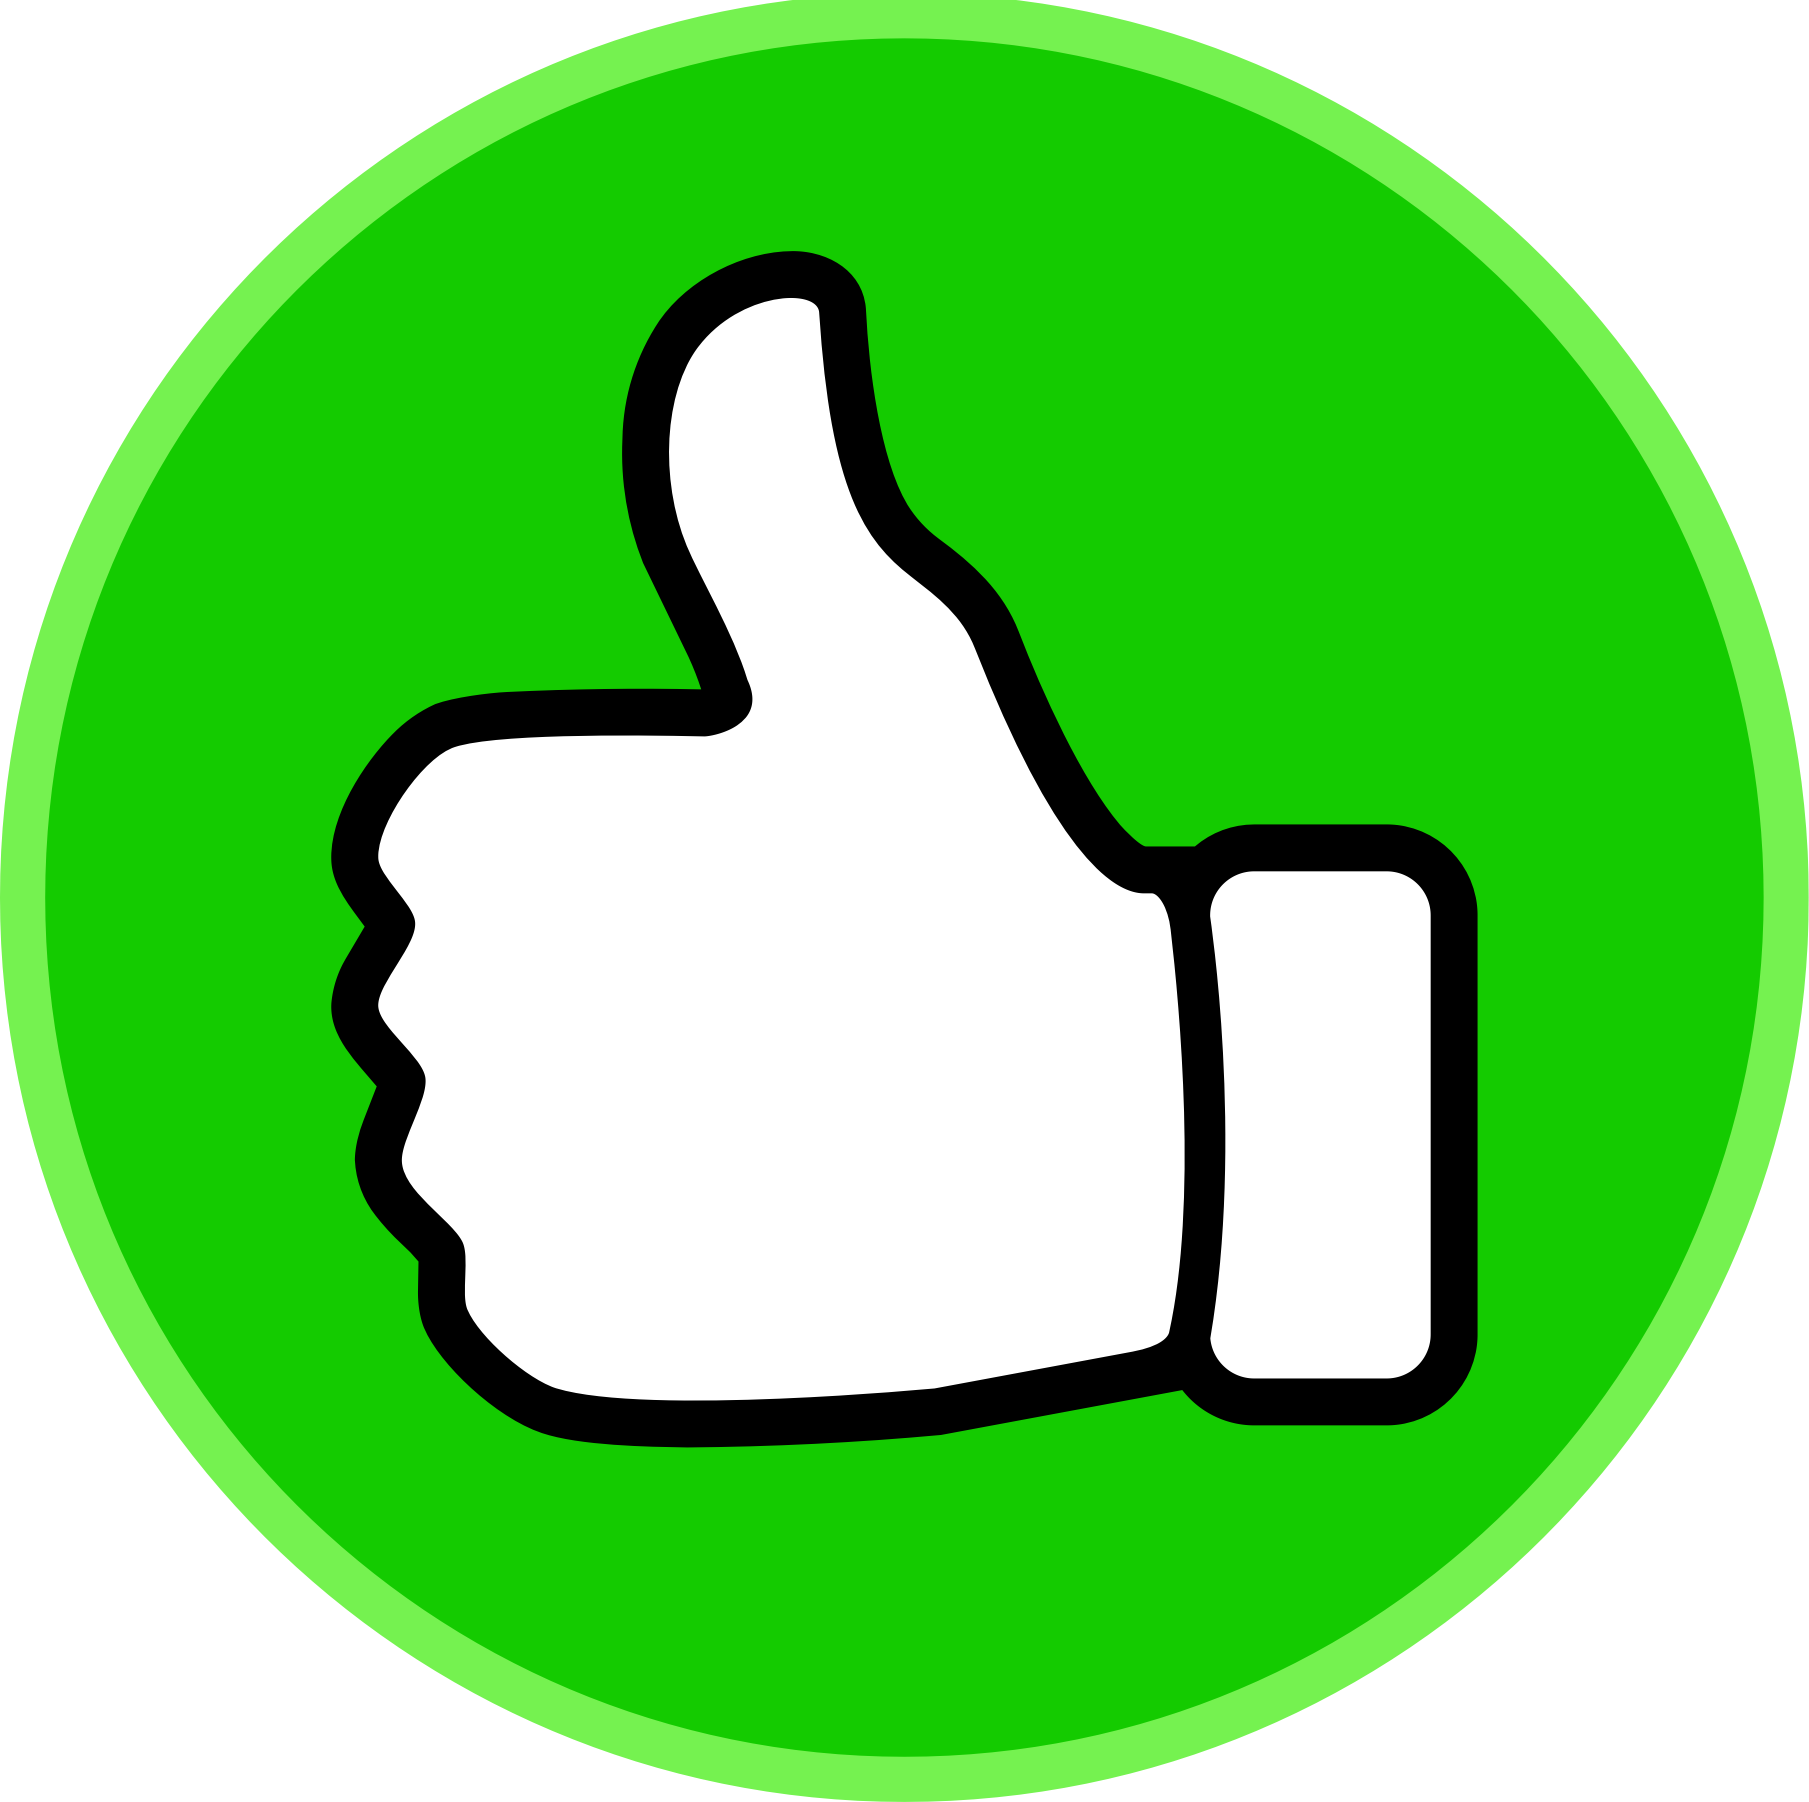 ... Free Thumbs Up Clipart Pi